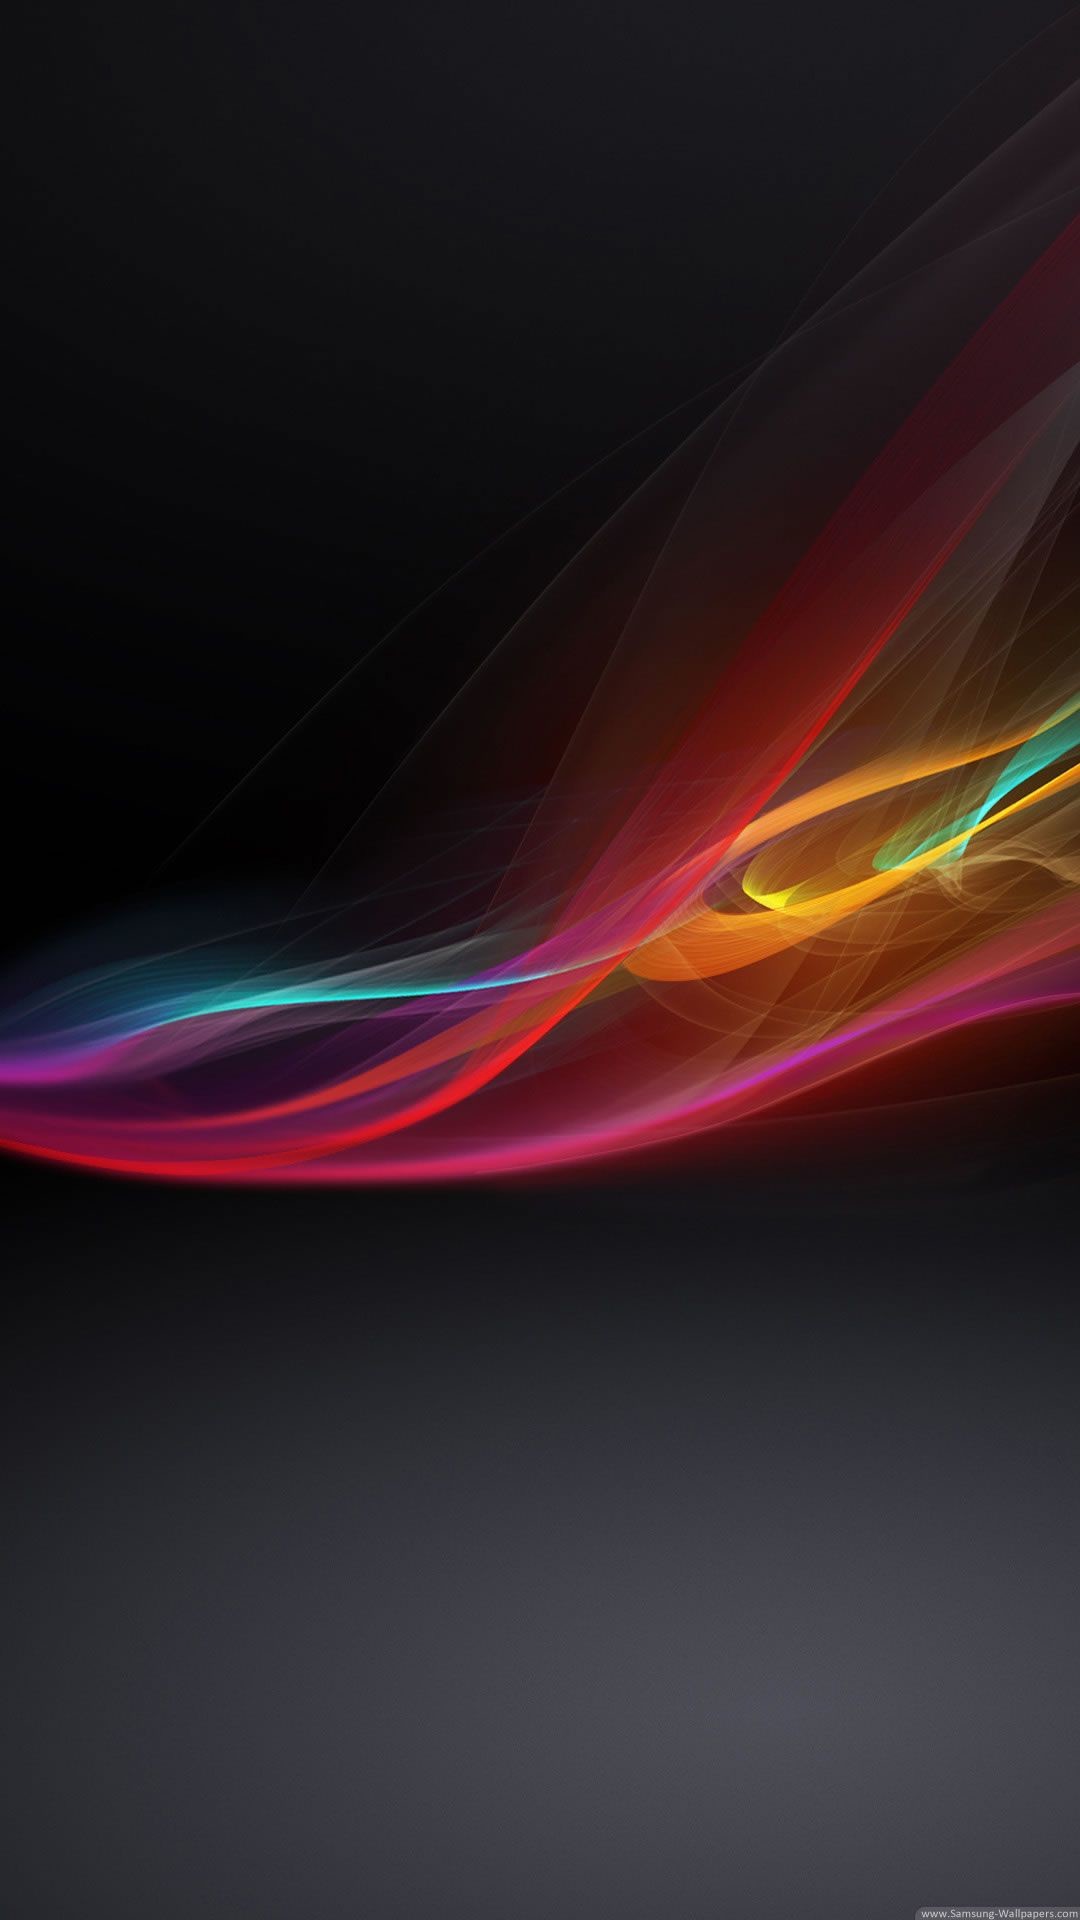 1080x1920 Colorful Soft Light Waves iPhone 6 Plus HD Wallpaper